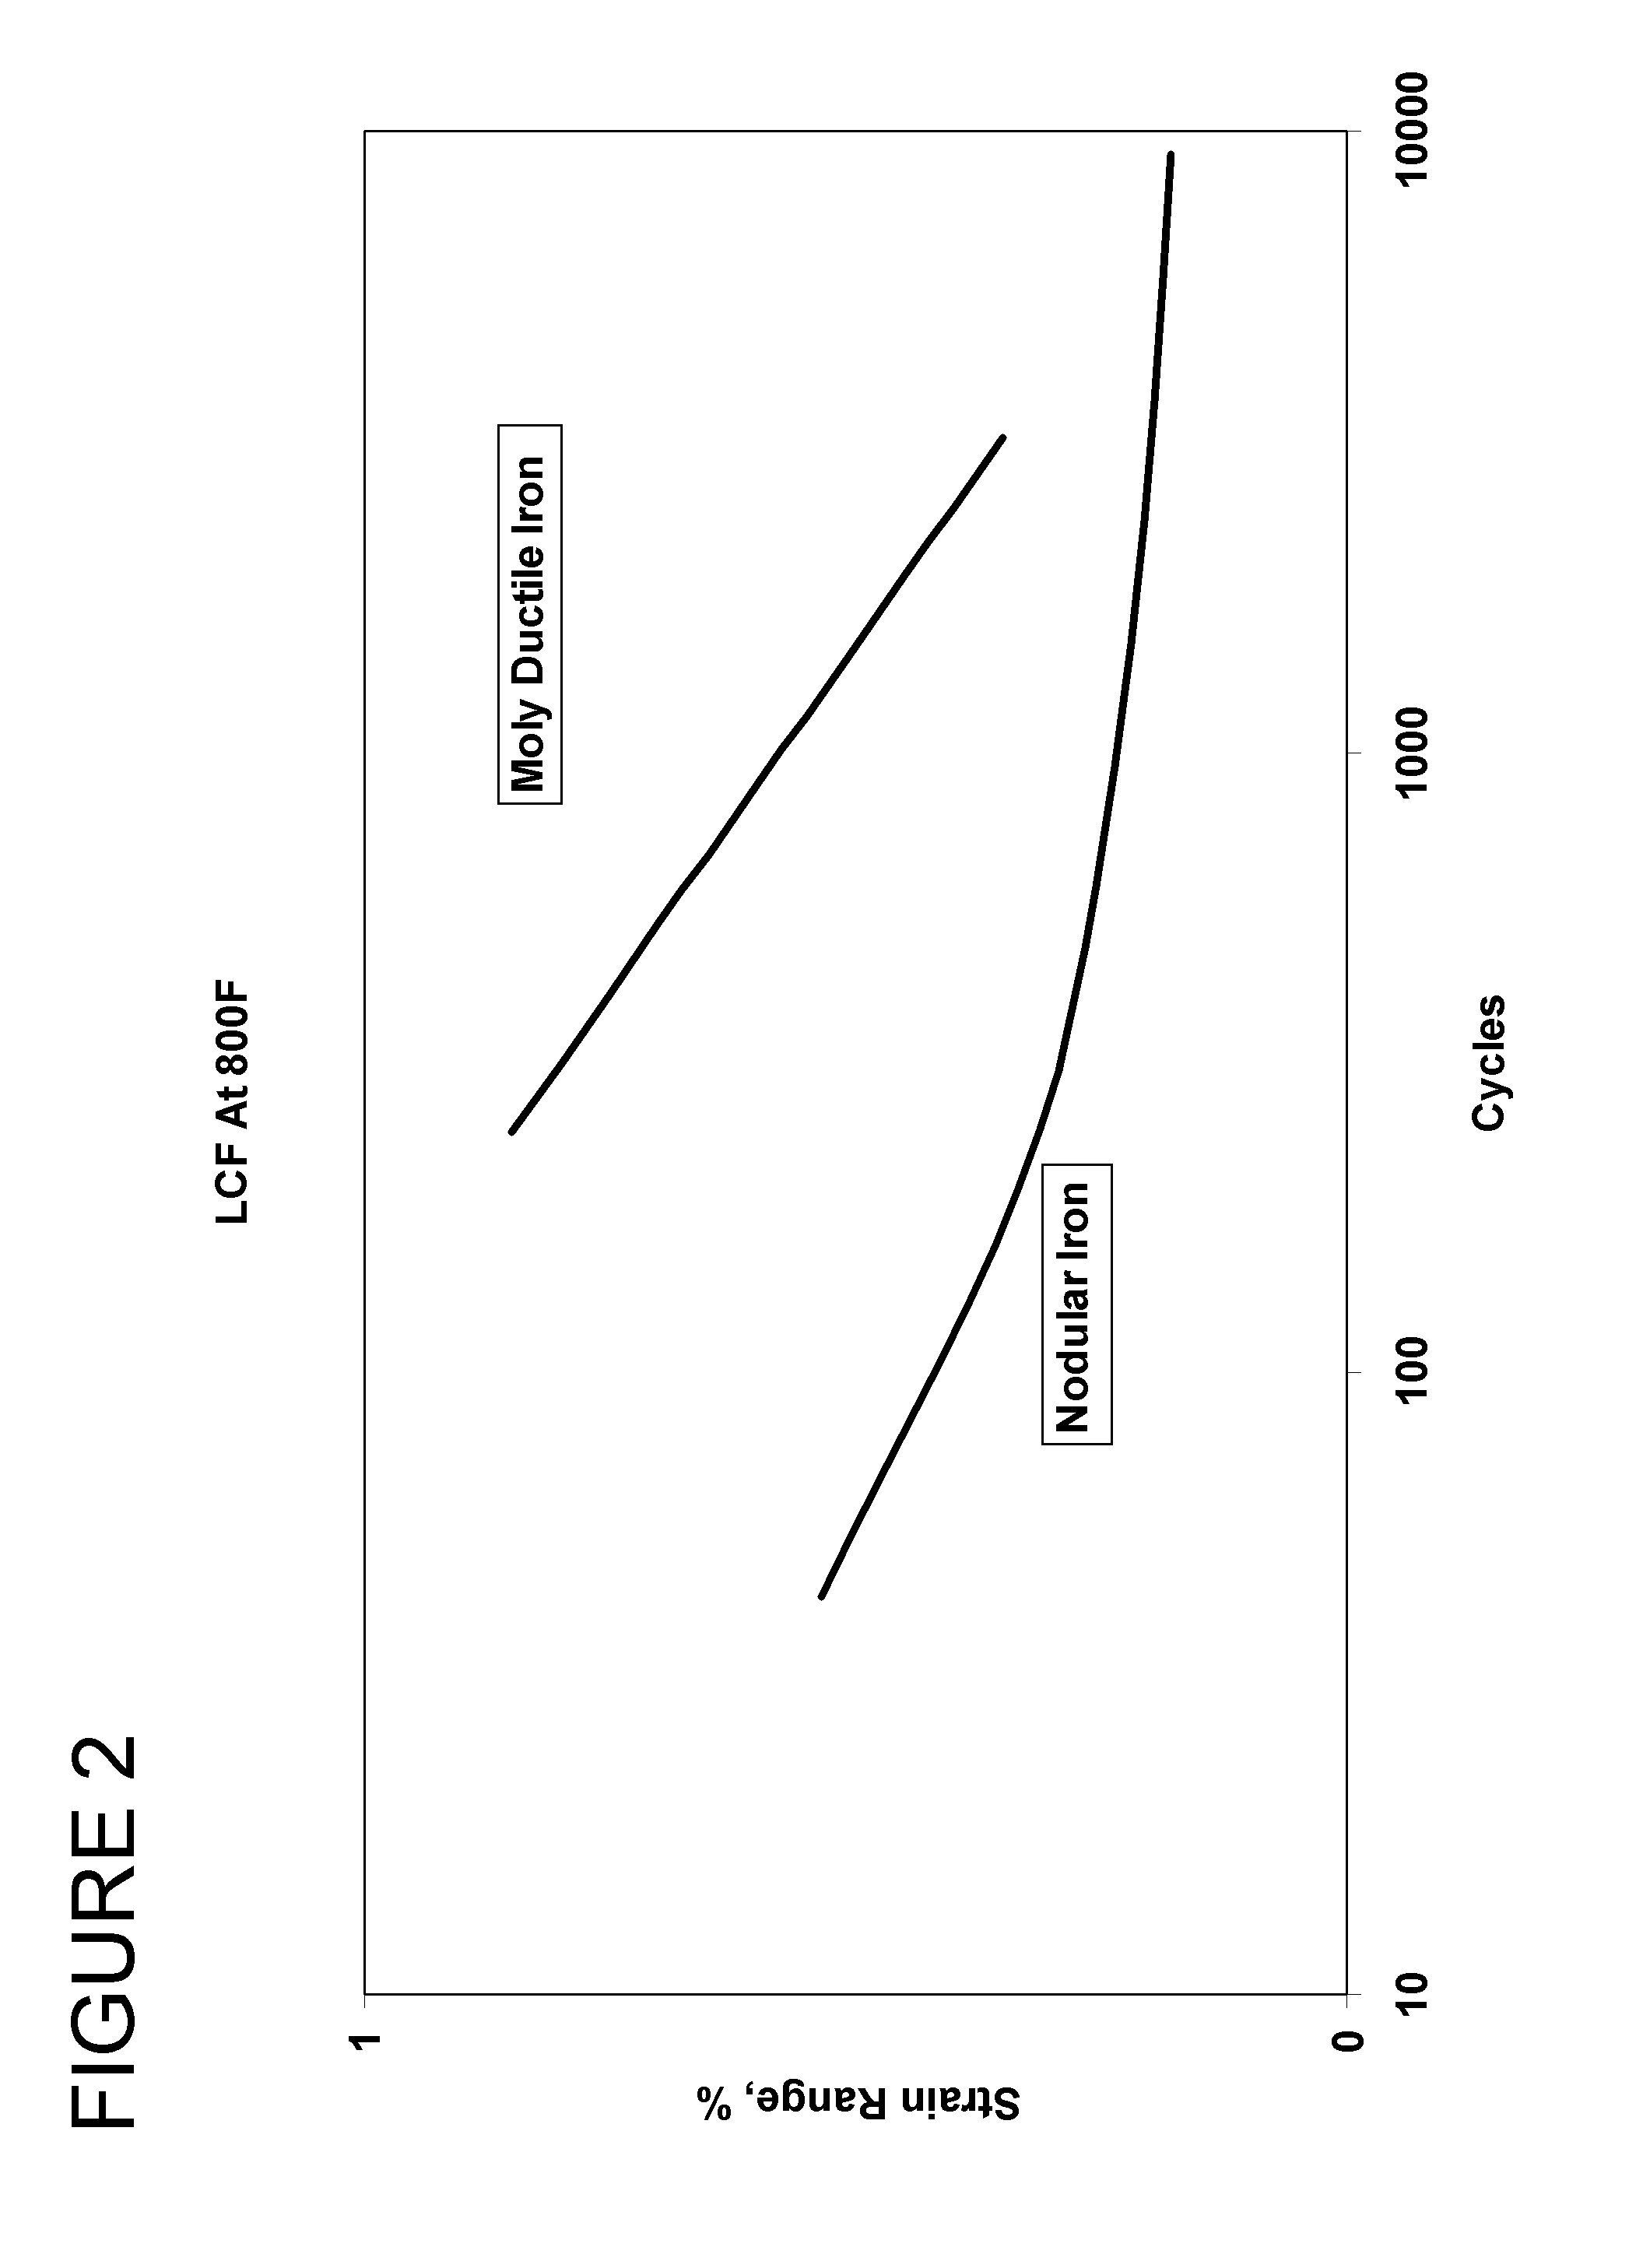 Method for improving creep resistance and low cycle fatigue properties of pressure-containing components